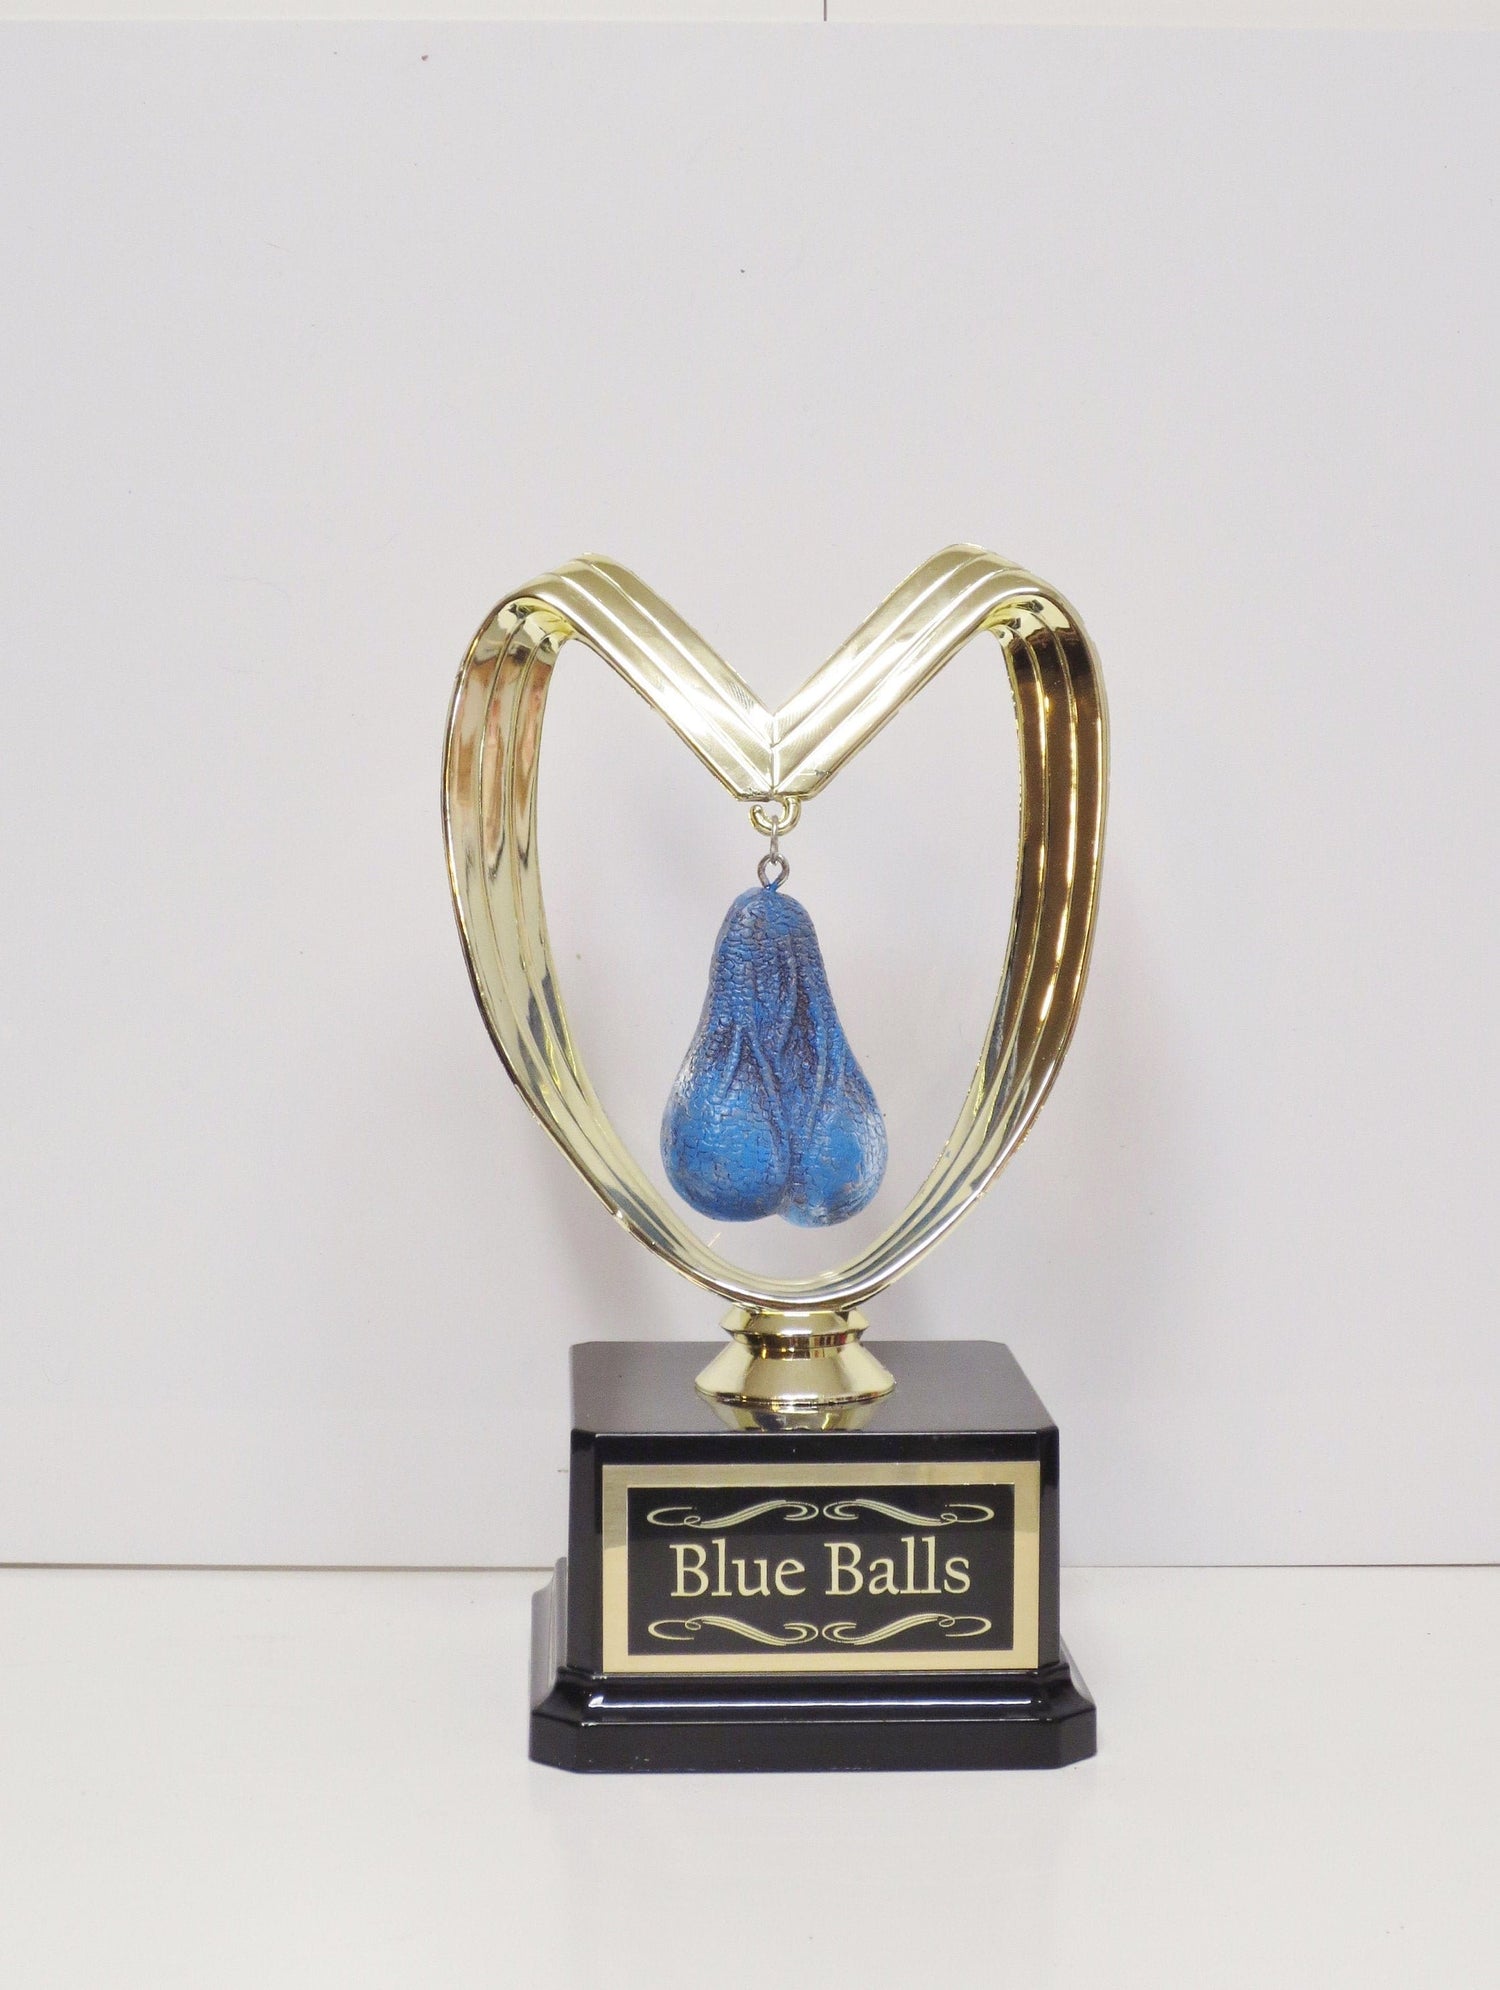 Blue Balls Funny Trophy FFL Trophy You Suck Balls Last Place Loser Grow A Pair Adult Humor Gag Gift Testicle Fantasy Football Sacko